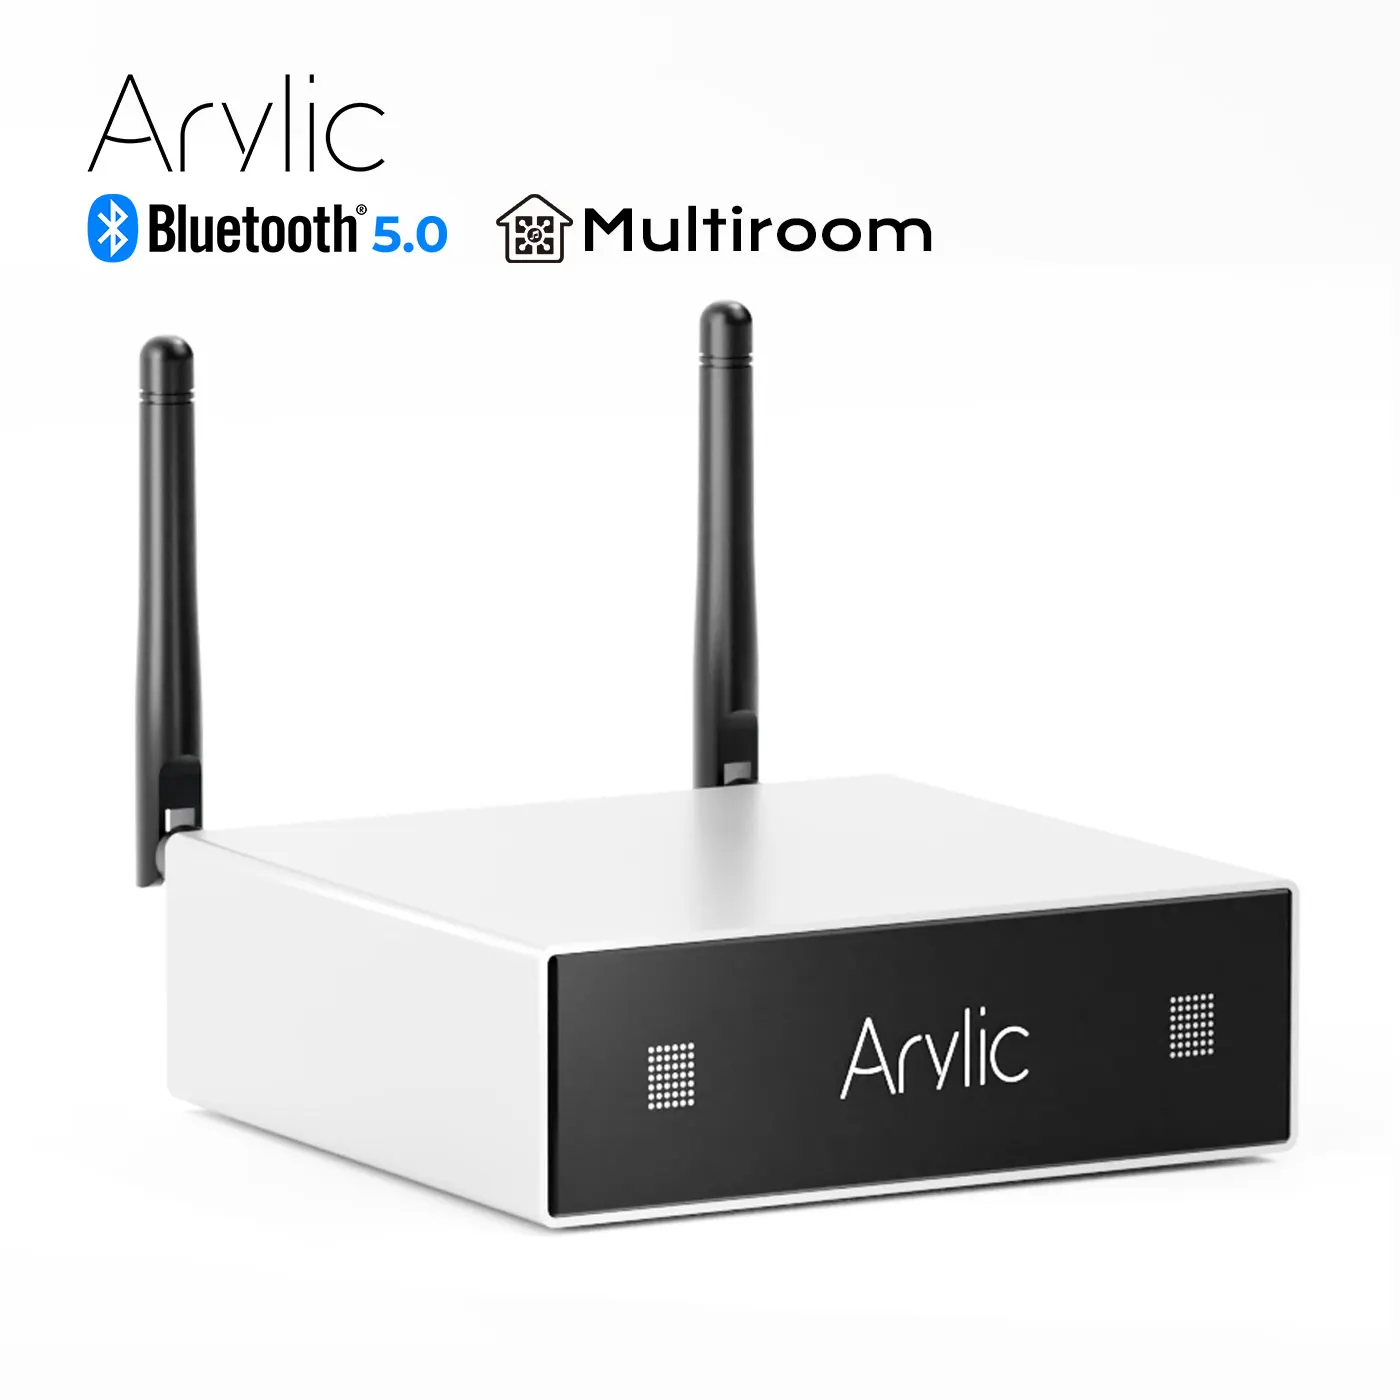 Arylic A50 WiFi and Bluetooth Amplifier Wireless Audio Receiver HiFi Class D Digital Streamer Multi-room DLNA Airplay Spotify